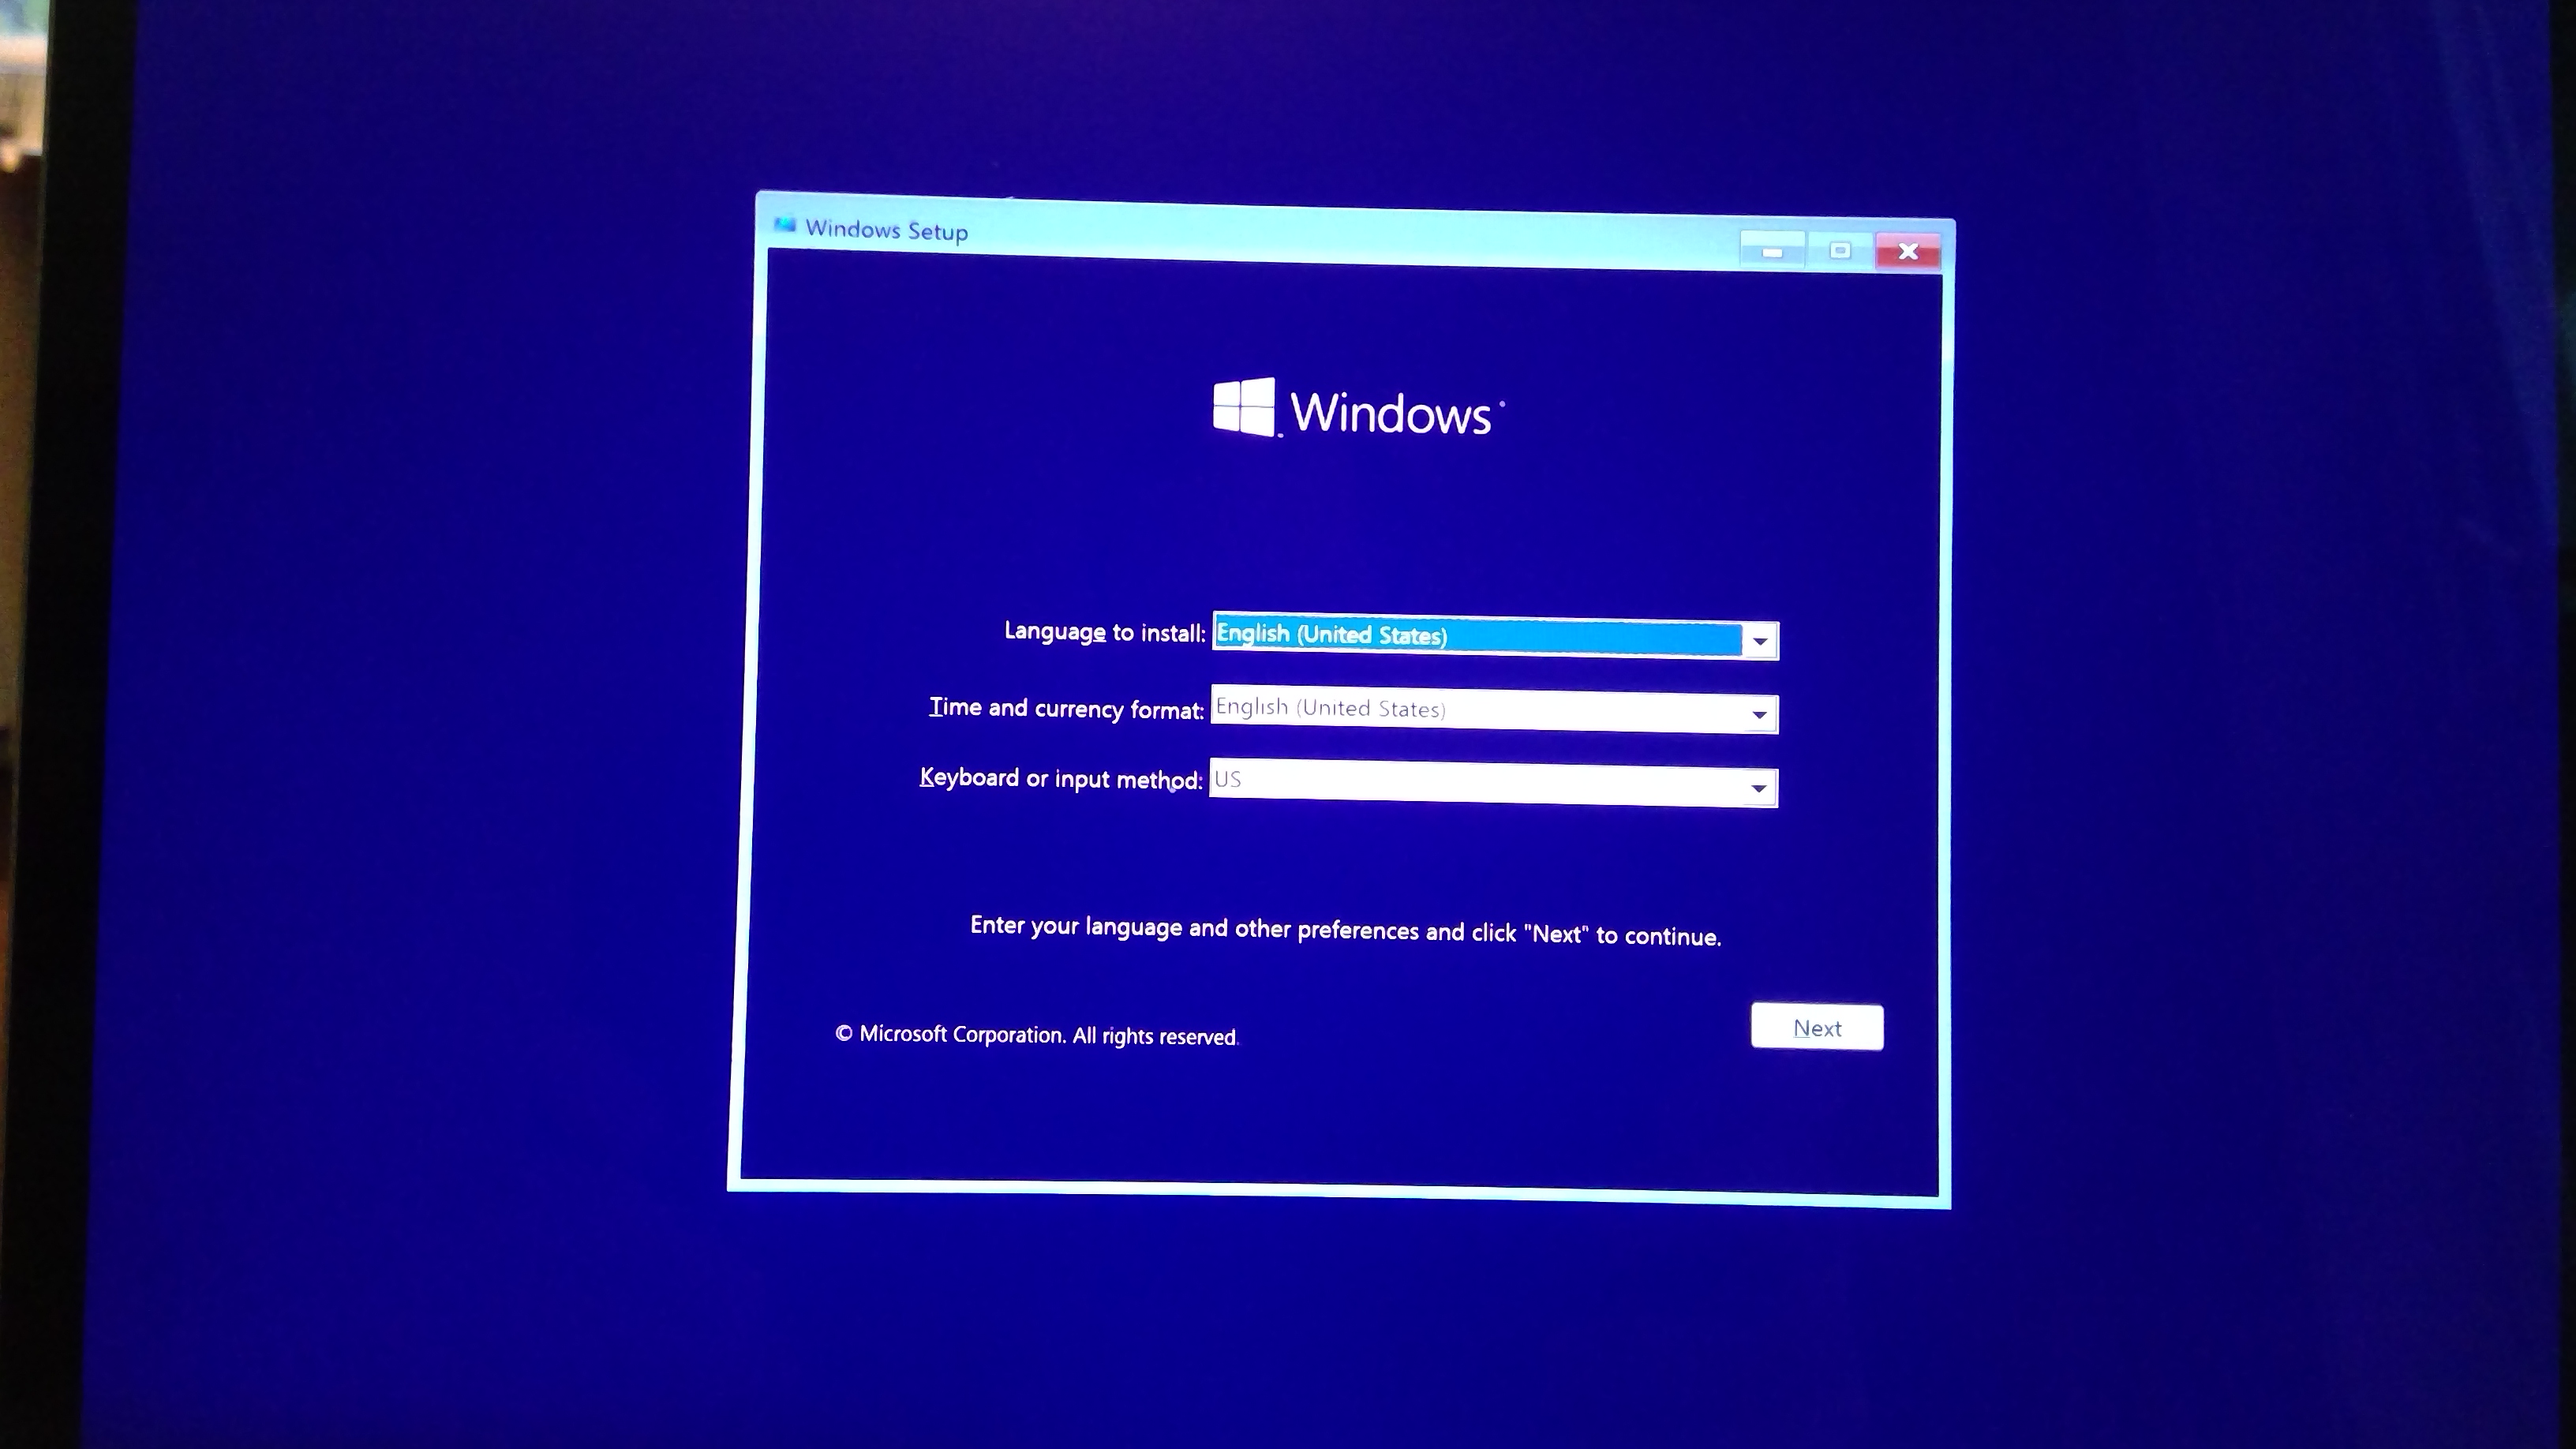 USB windows 10 setup installer, Can't use mouse or click "next" on setup  screen - Microsoft Q&A